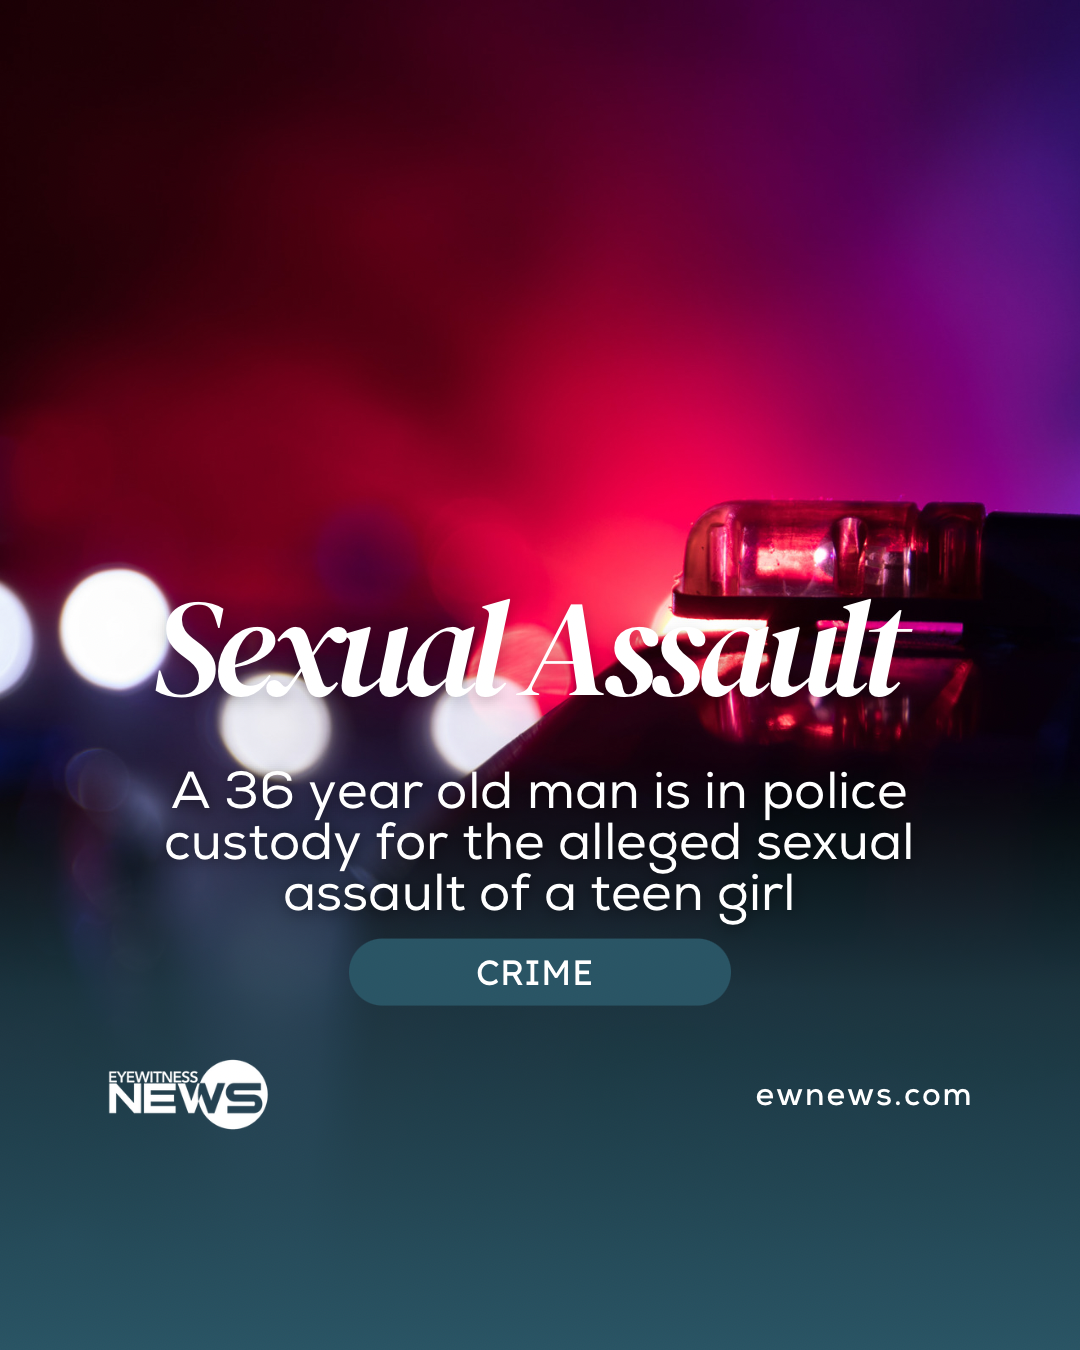 man-arrested-for-the-alleged-sexual-assault-of-teen